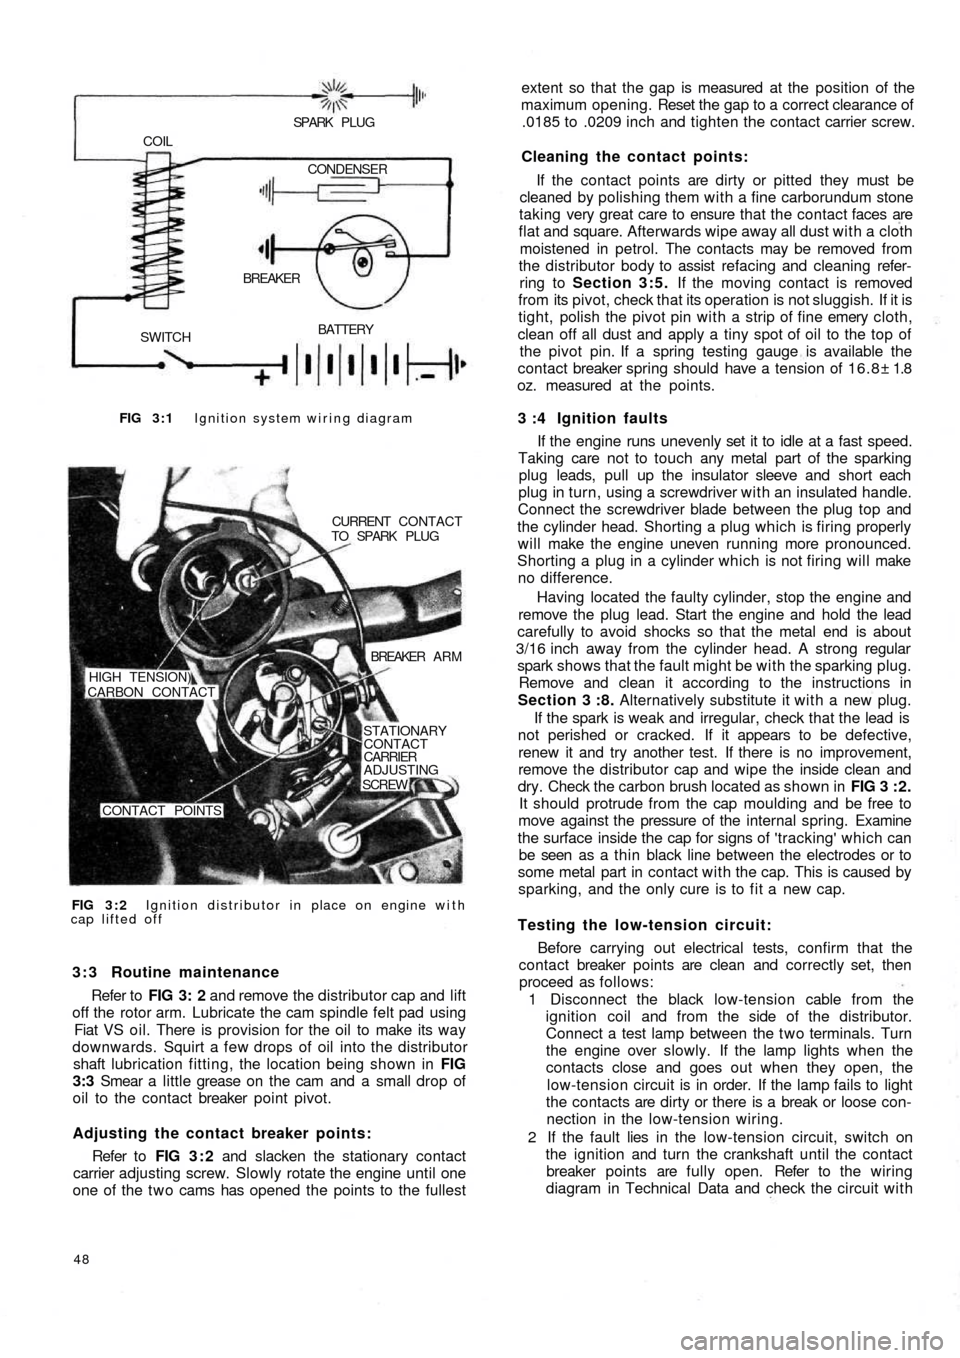 FIAT 500 1969 1.G Service Manual FIG 3 : 1 Ignition system wiring diagram
BATTERY
SWITCHBREAKER COIL
SPARK  PLUG
CONDENSER
FIG 3 : 2 Ignition distributor in place on engine with
cap lifted offCURRENT  CONTACT
TO  SPARK  PLUG
BREAKER 